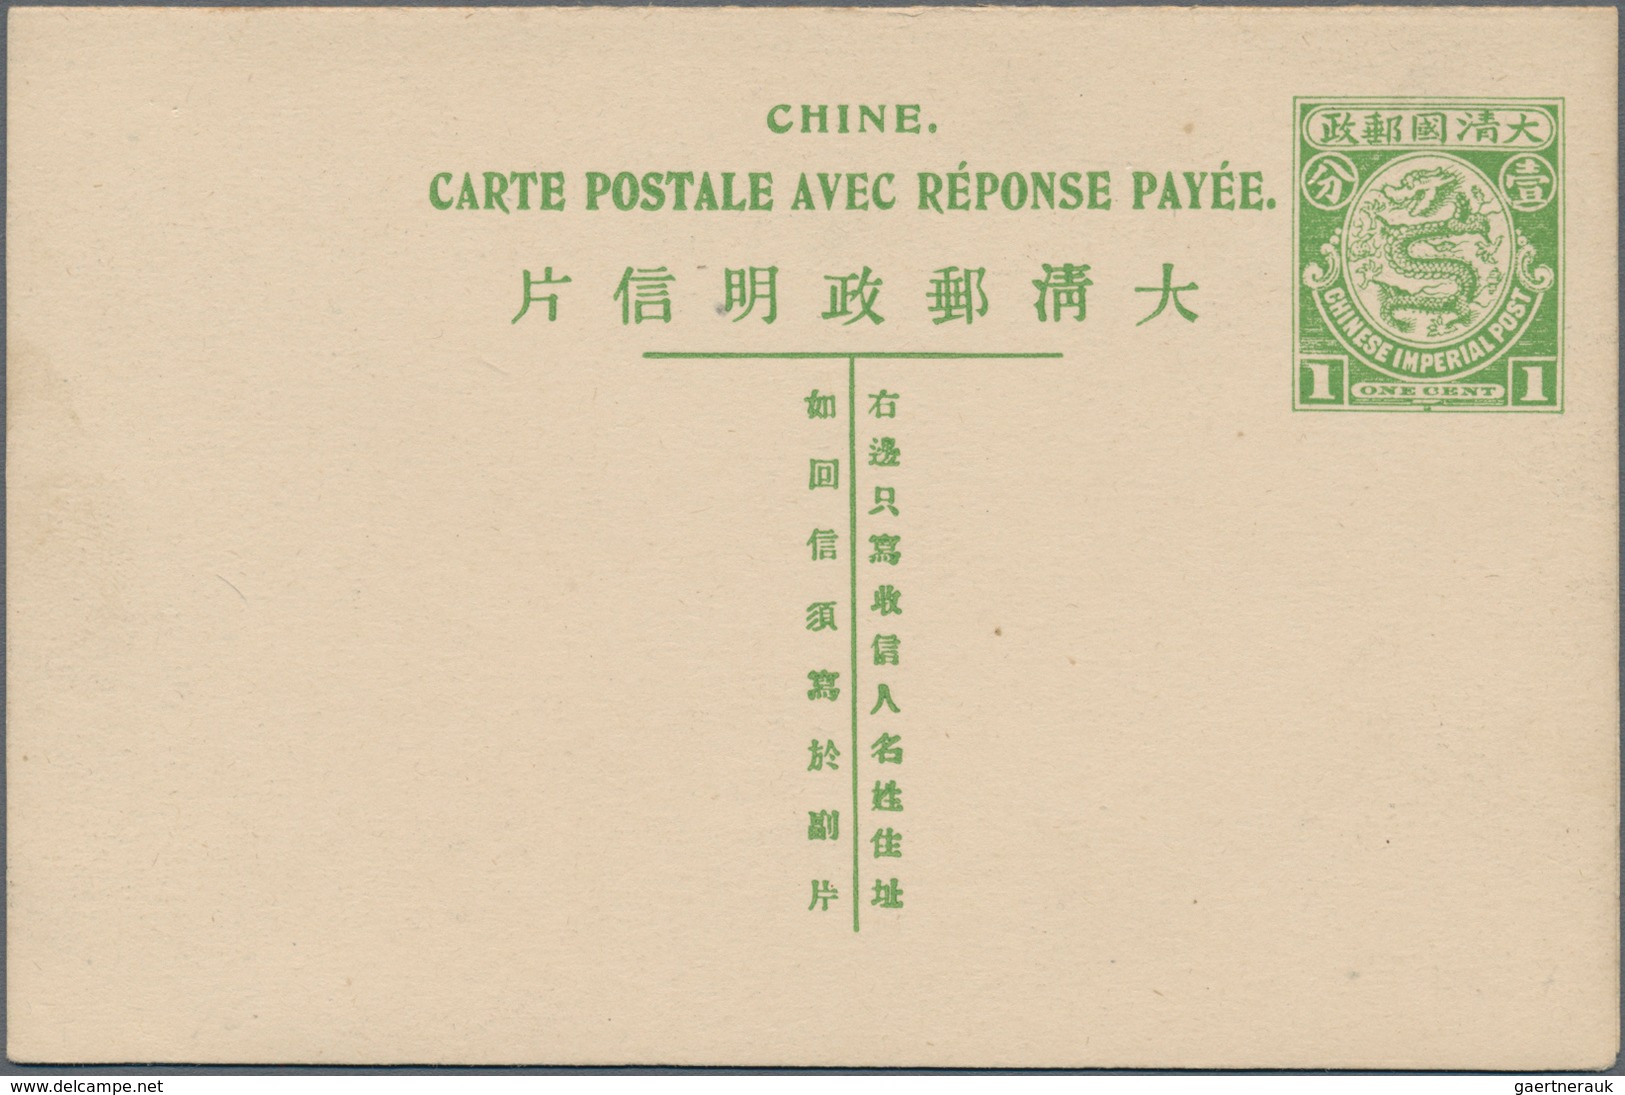 China - Ganzsachen: 1908, Card Square Dragon 1 C. Green Uprated Coiling Dragon 3 C. Green Canc. "CHI - Cartes Postales